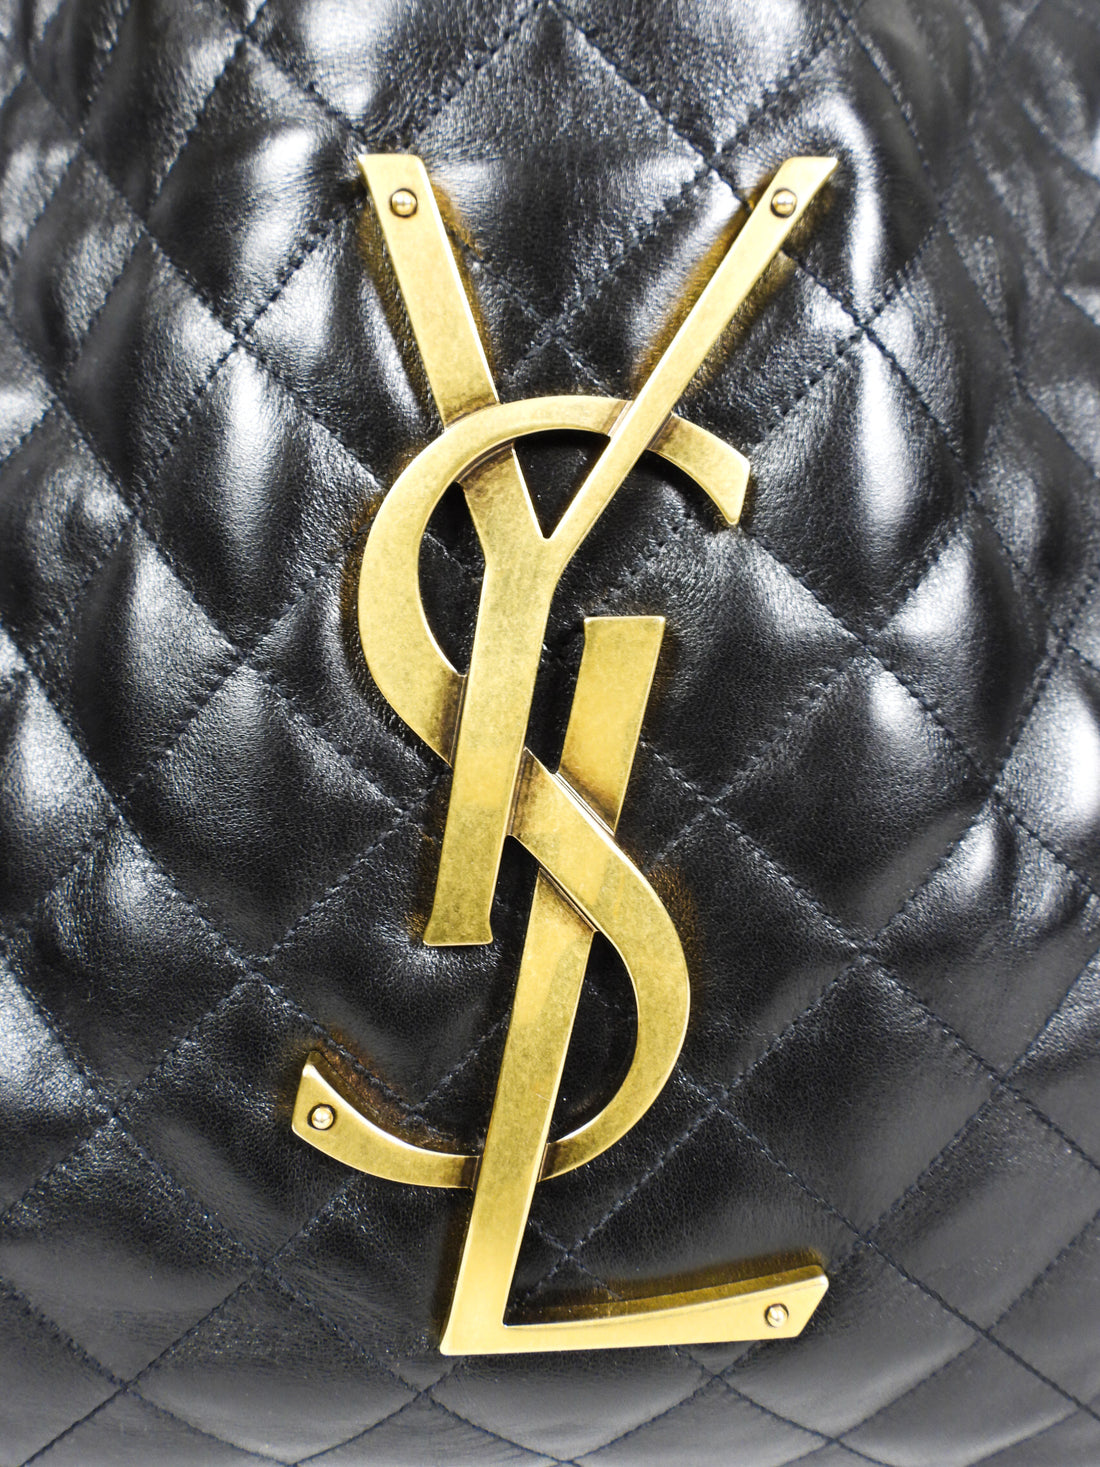 YSL Icare Maxi Shopping Bag In Quilted Lambskin